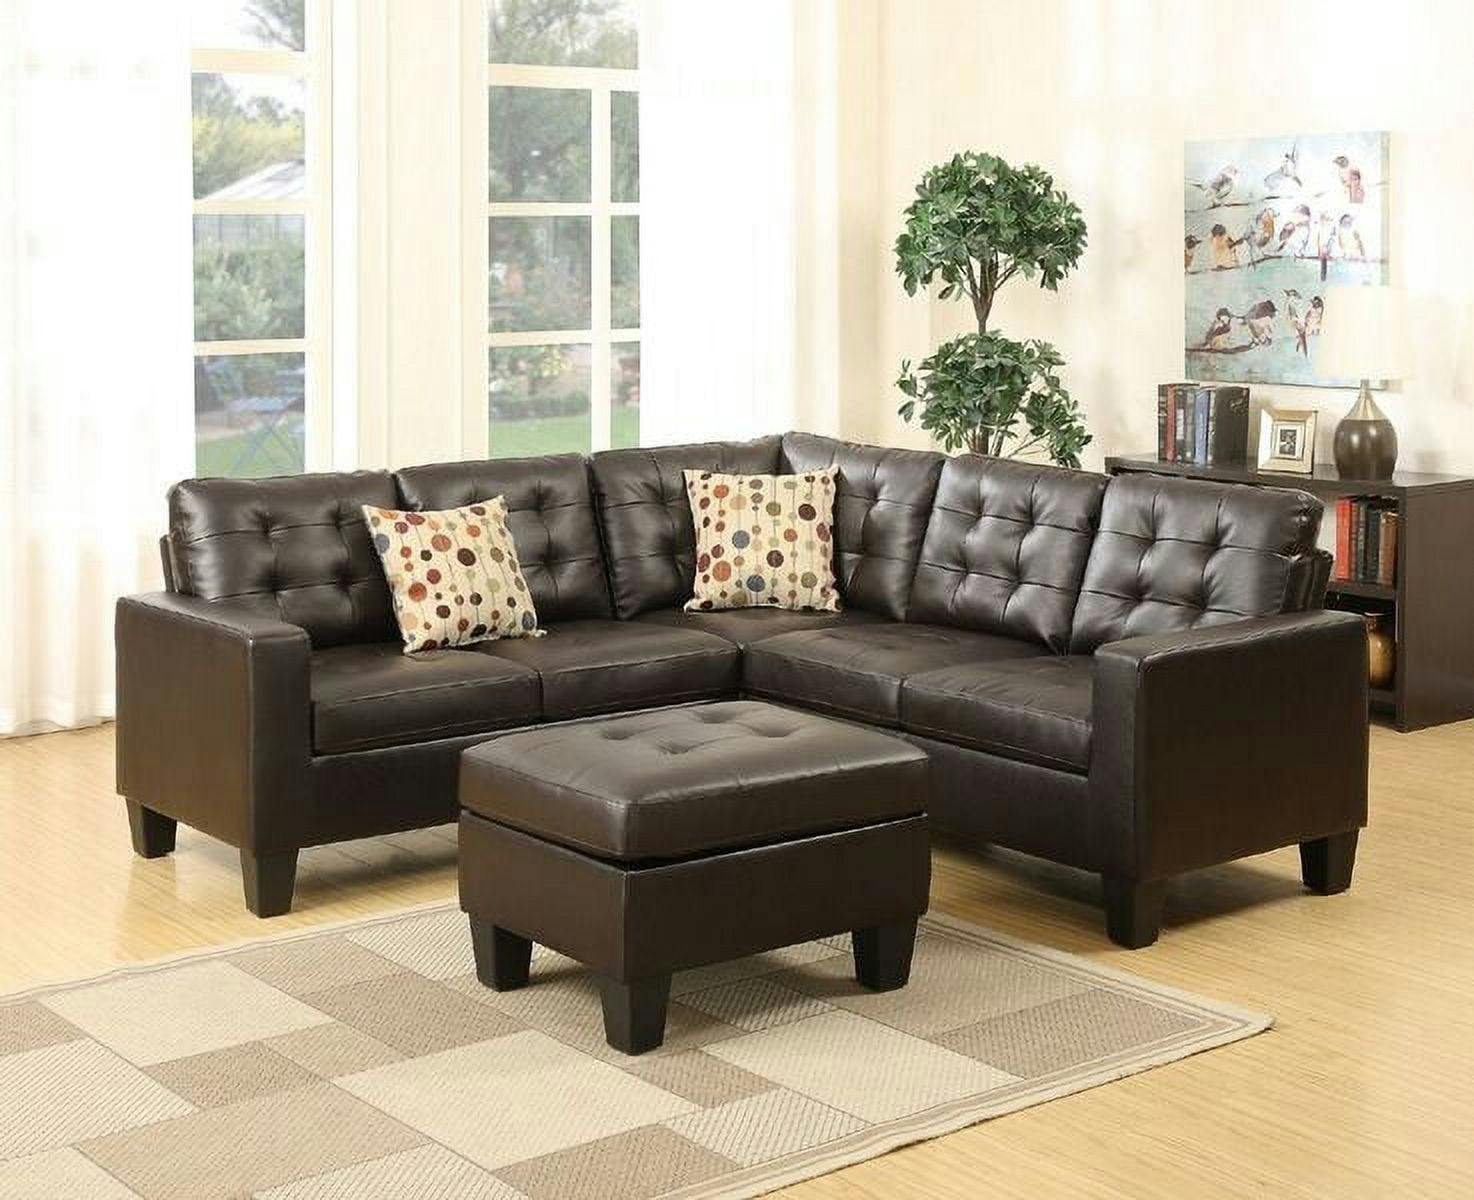 Espresso Faux Leather Tufted 4-Piece Sectional with Ottoman